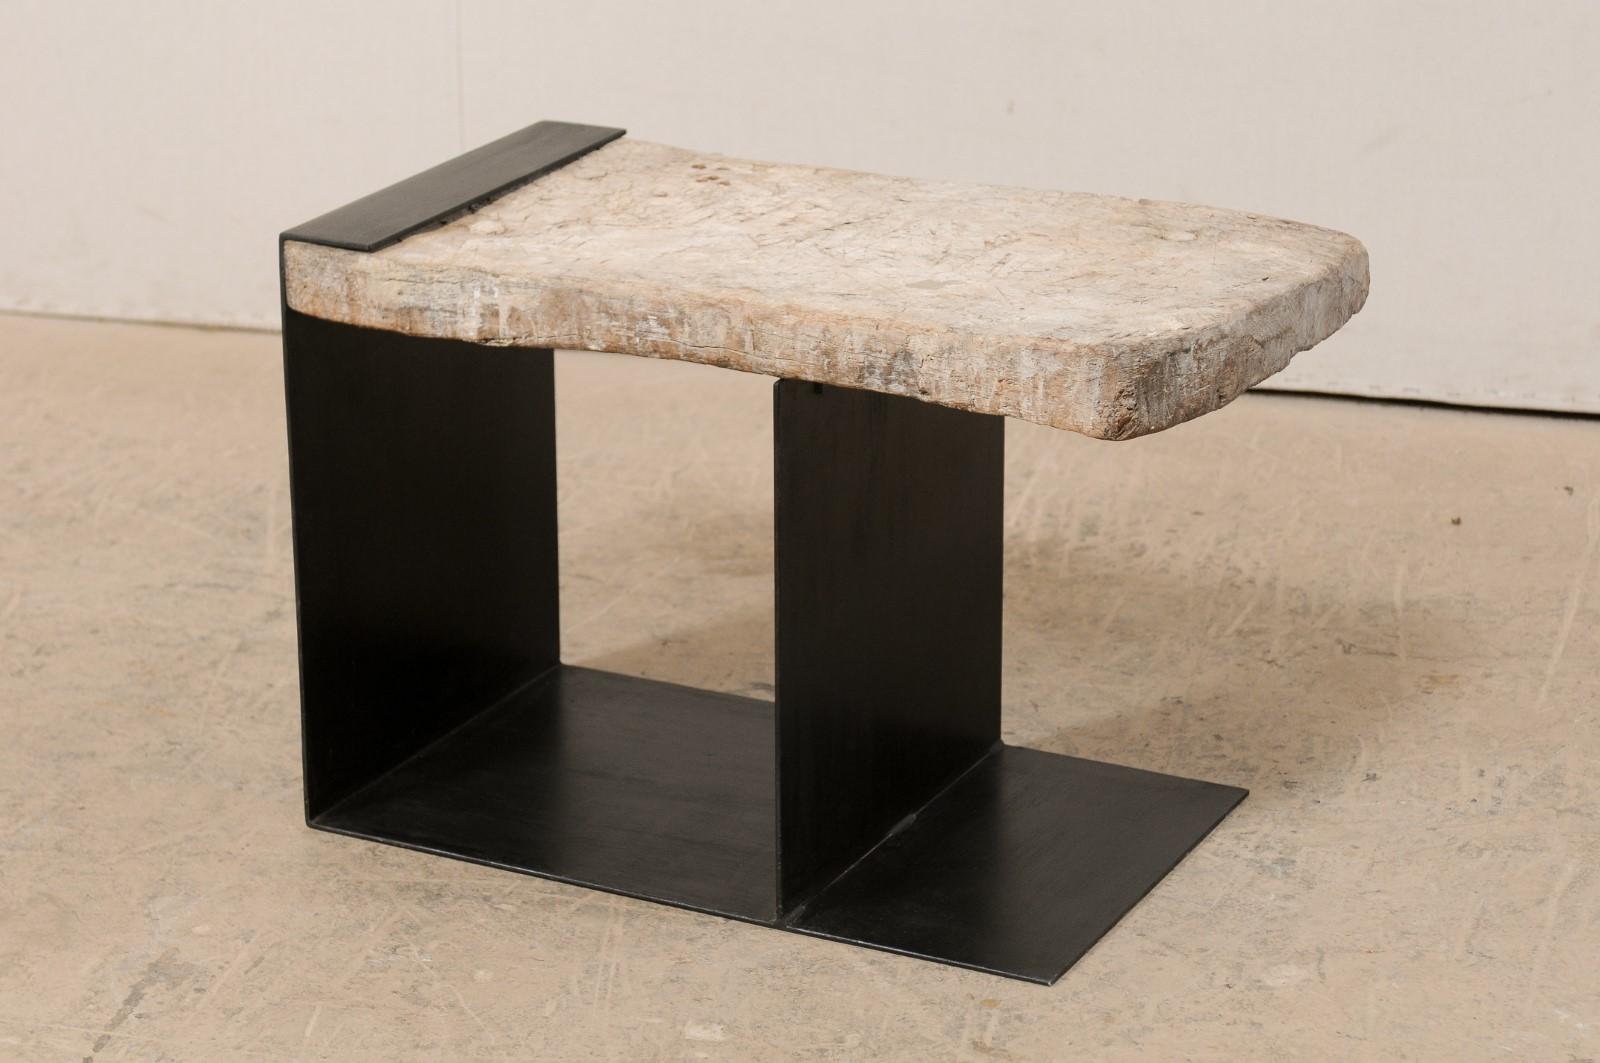 A modern-designed custom coffee table with 19th century Spanish butcher block top. This unique and one-of-a-kind piece has been created with an intriguing mix of rustic and modern elements. The top of this table is comprised of a 19th century wooden